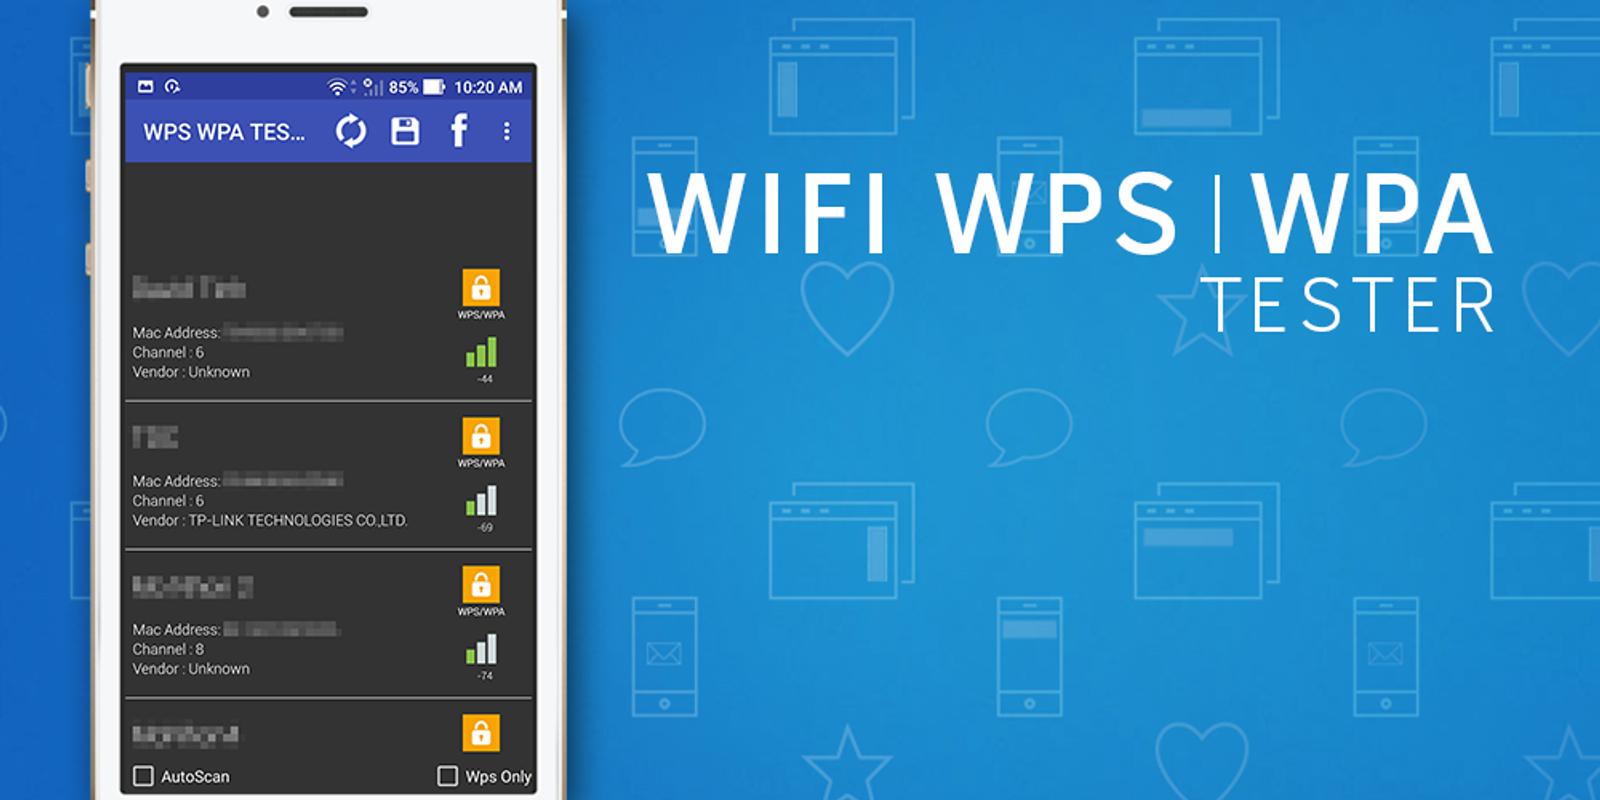 Android WPS. Tester. WPS. Wi Fi Tester PC app.